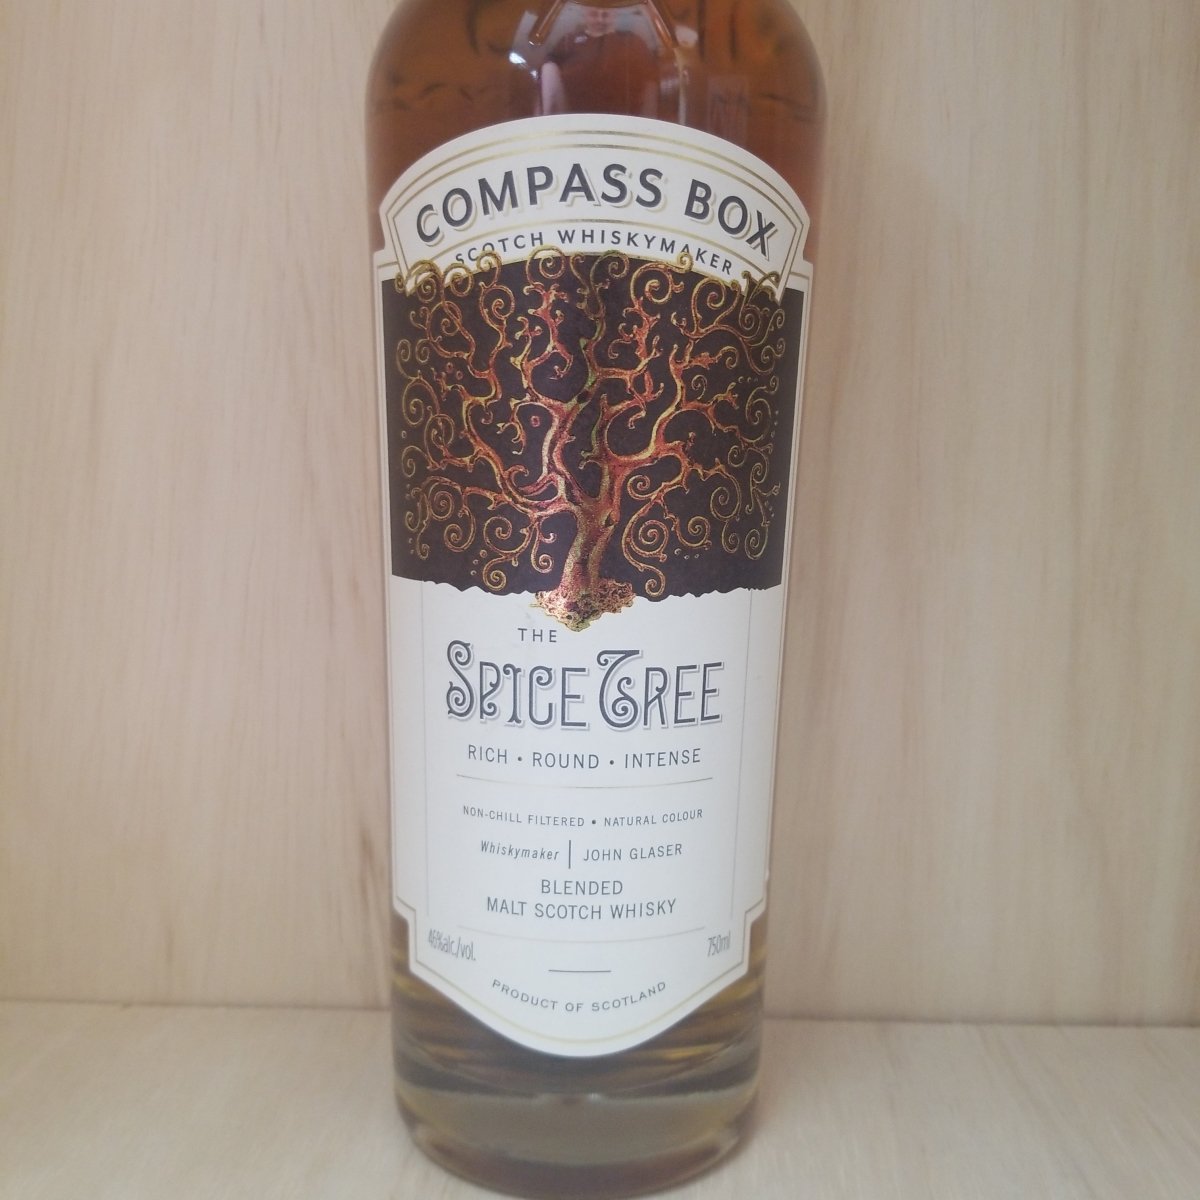 Compass Box The Spice Tree Blended Scotch 750ml - Sip & Say